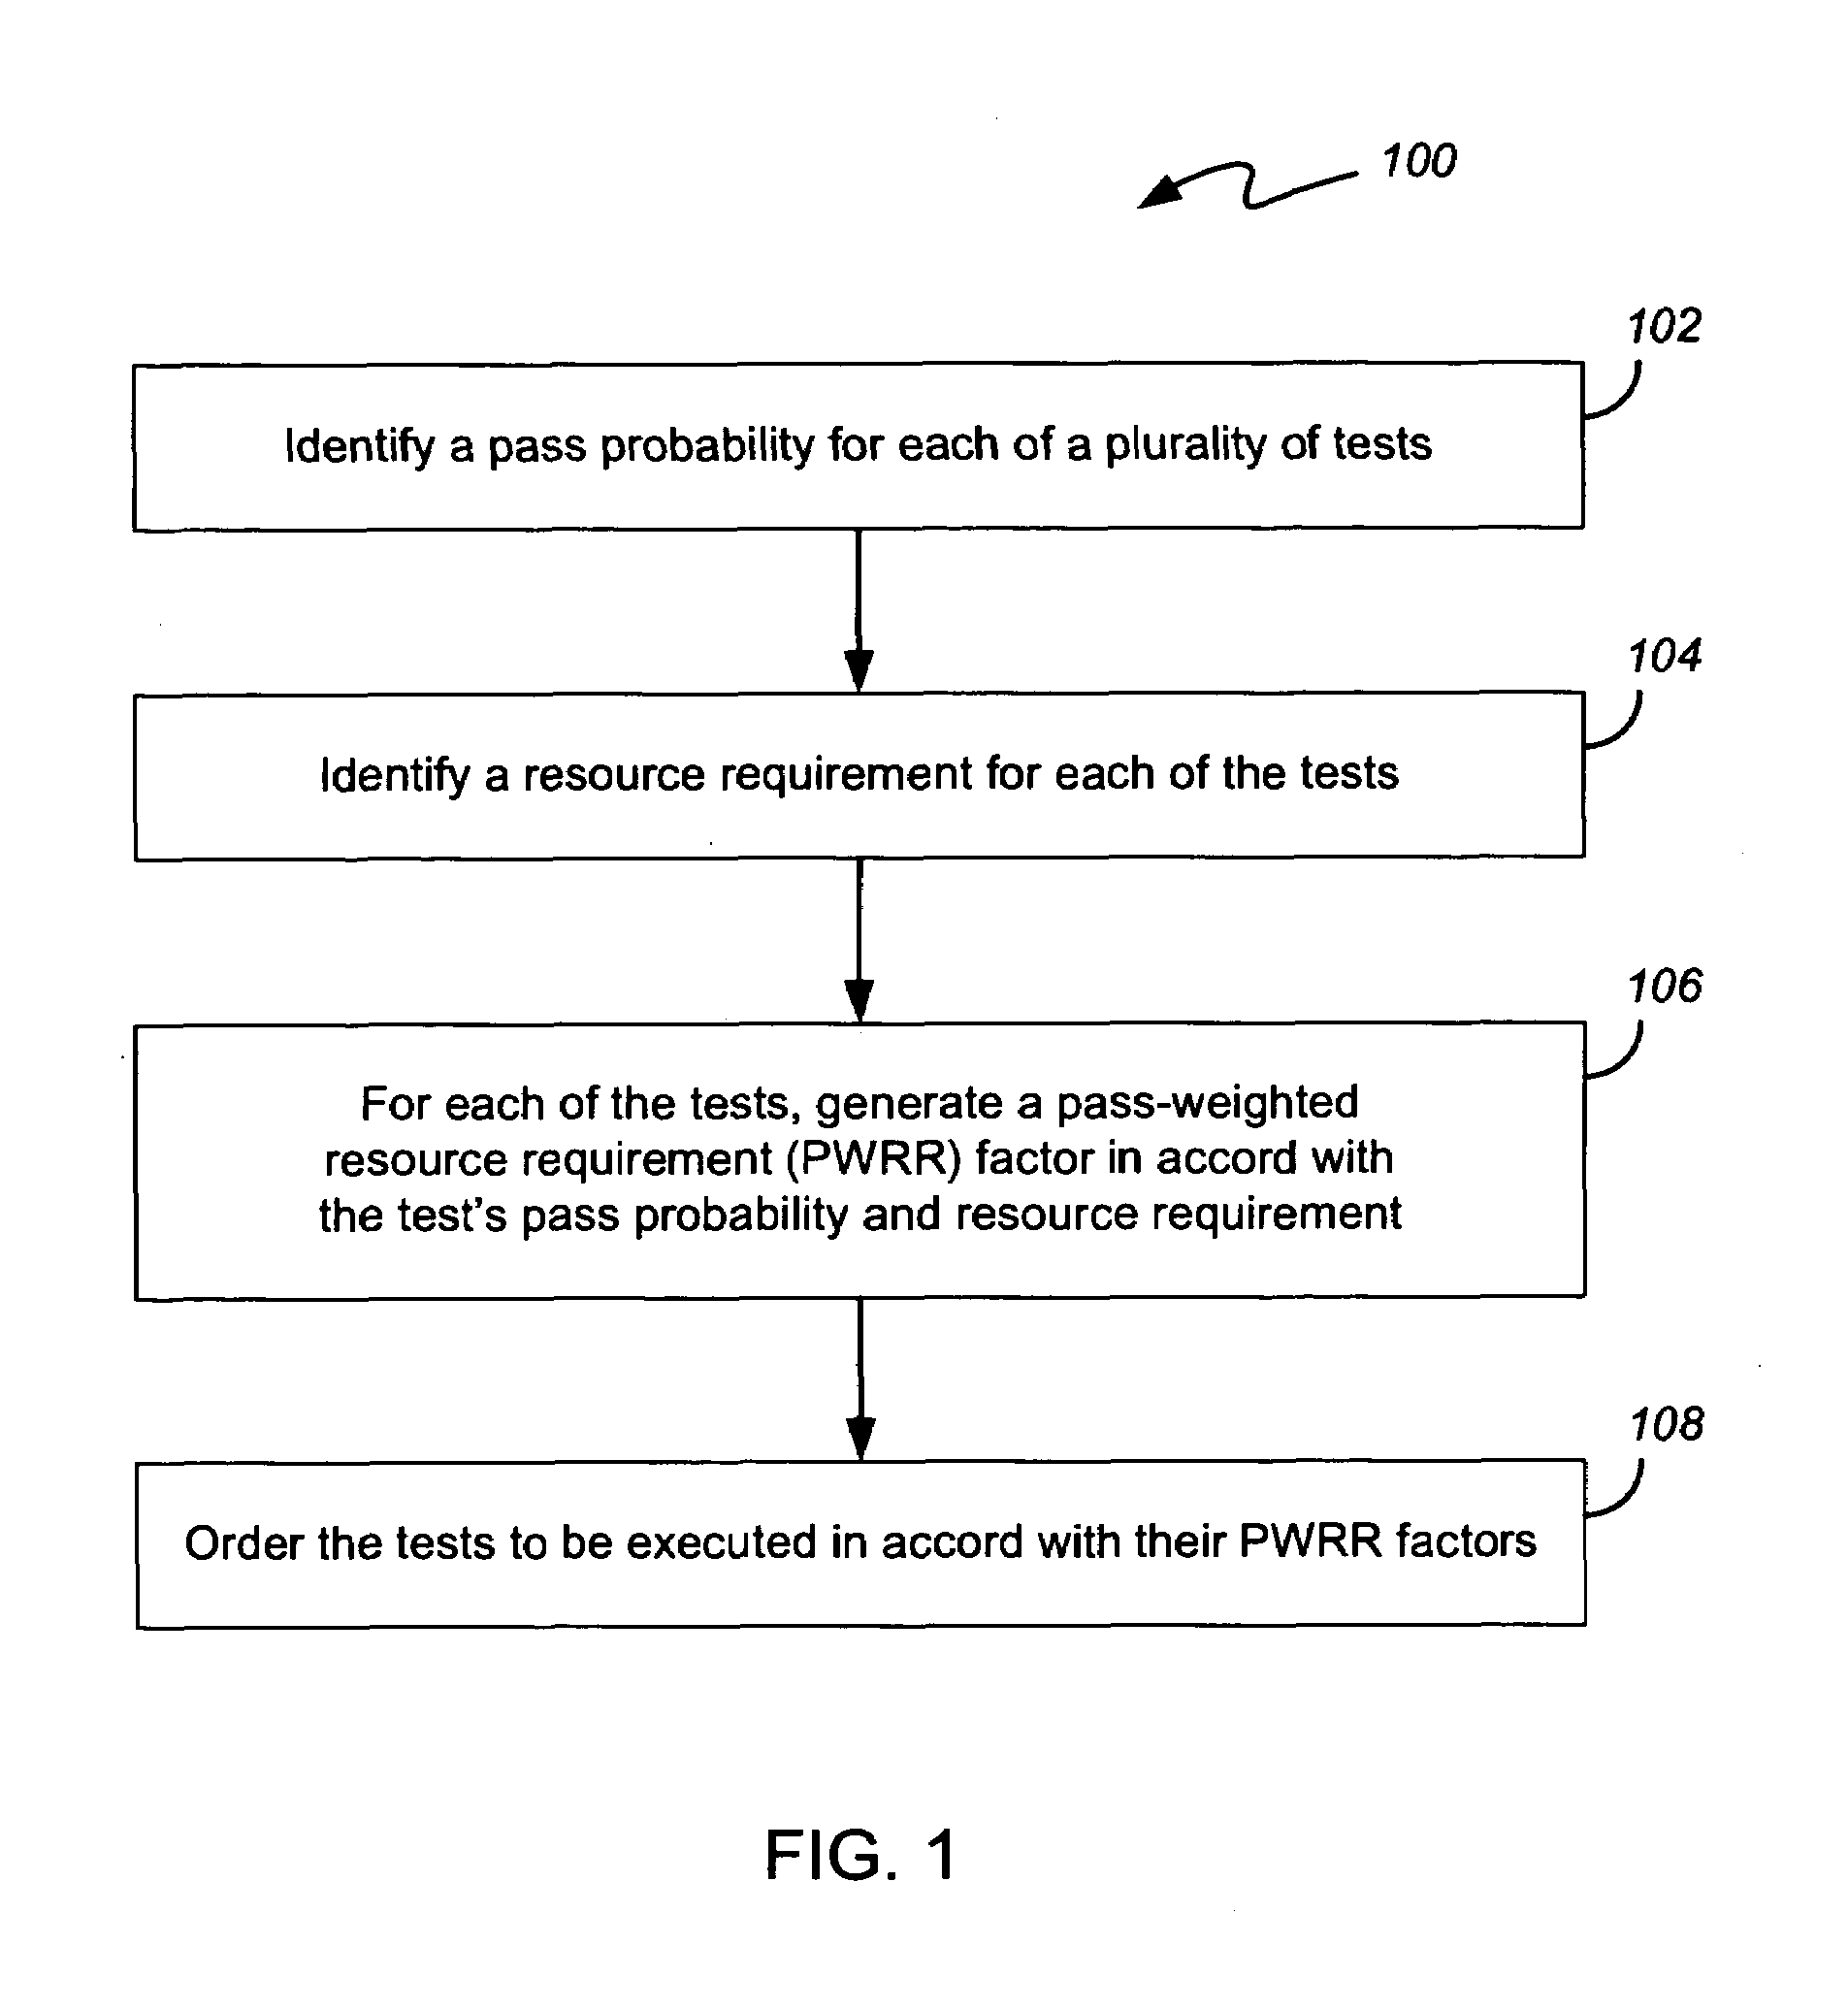 Method for optimizing test order, and machine-readable media storing sequences of instructions to perform same